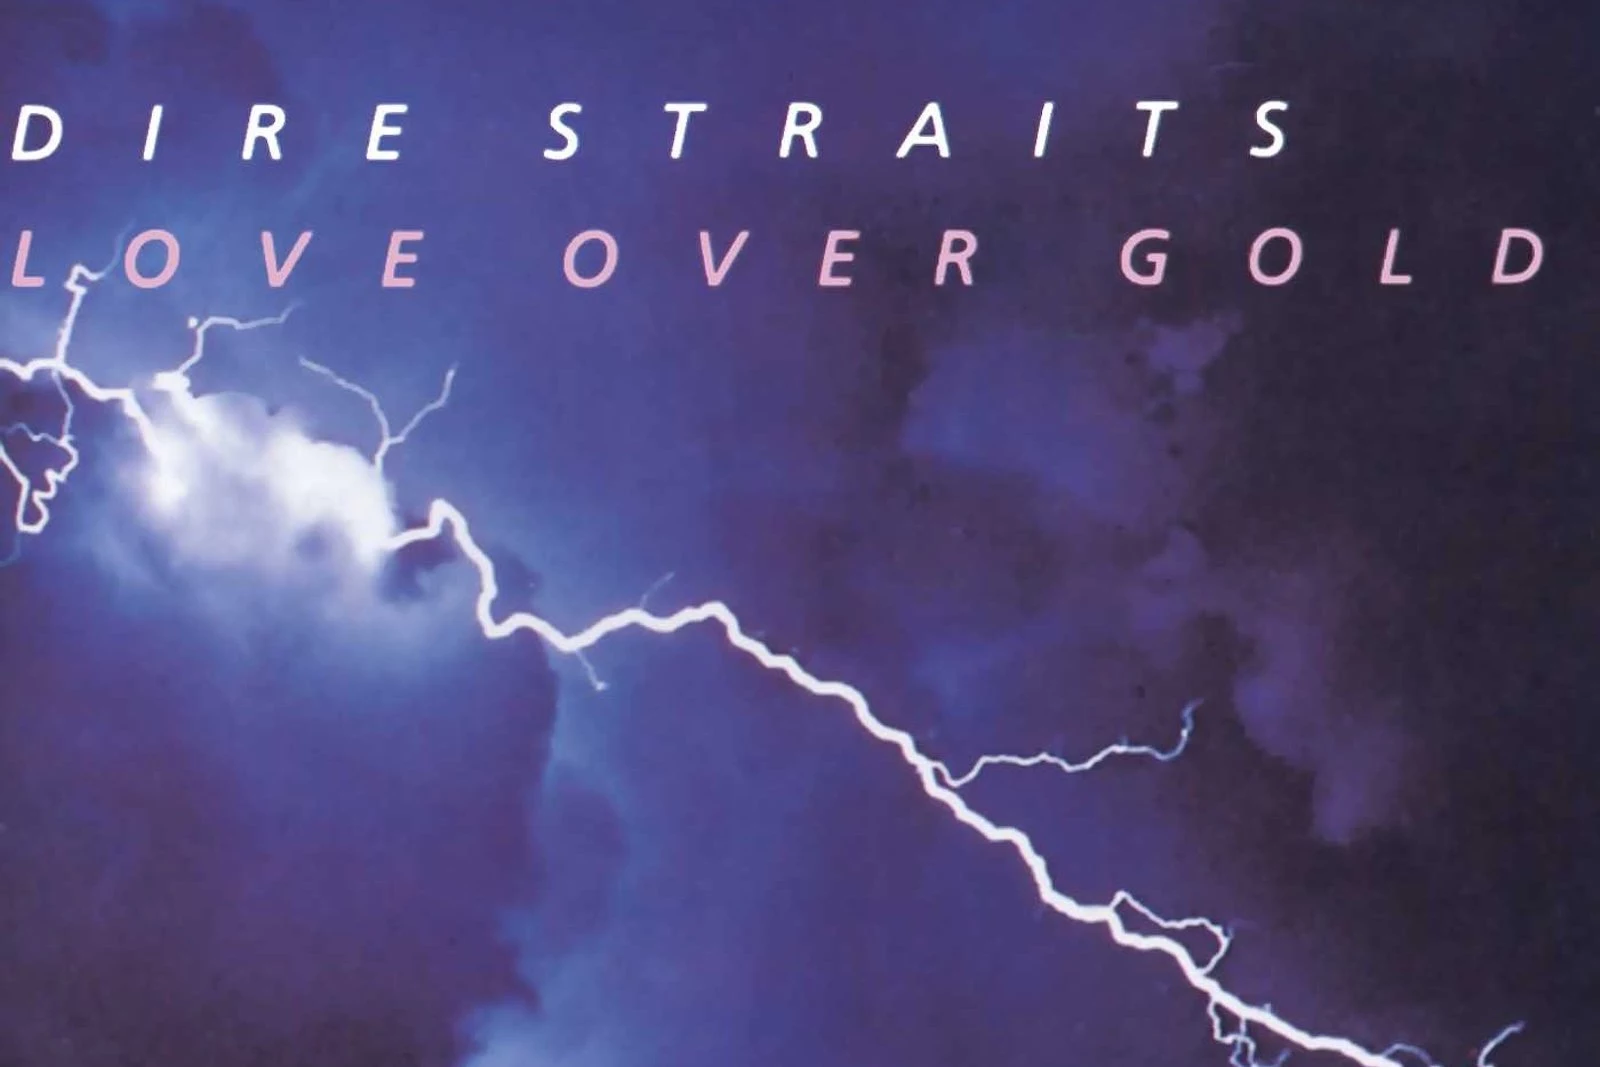 40 Years Ago Dire Straits Ramps Up on Love Over Gold